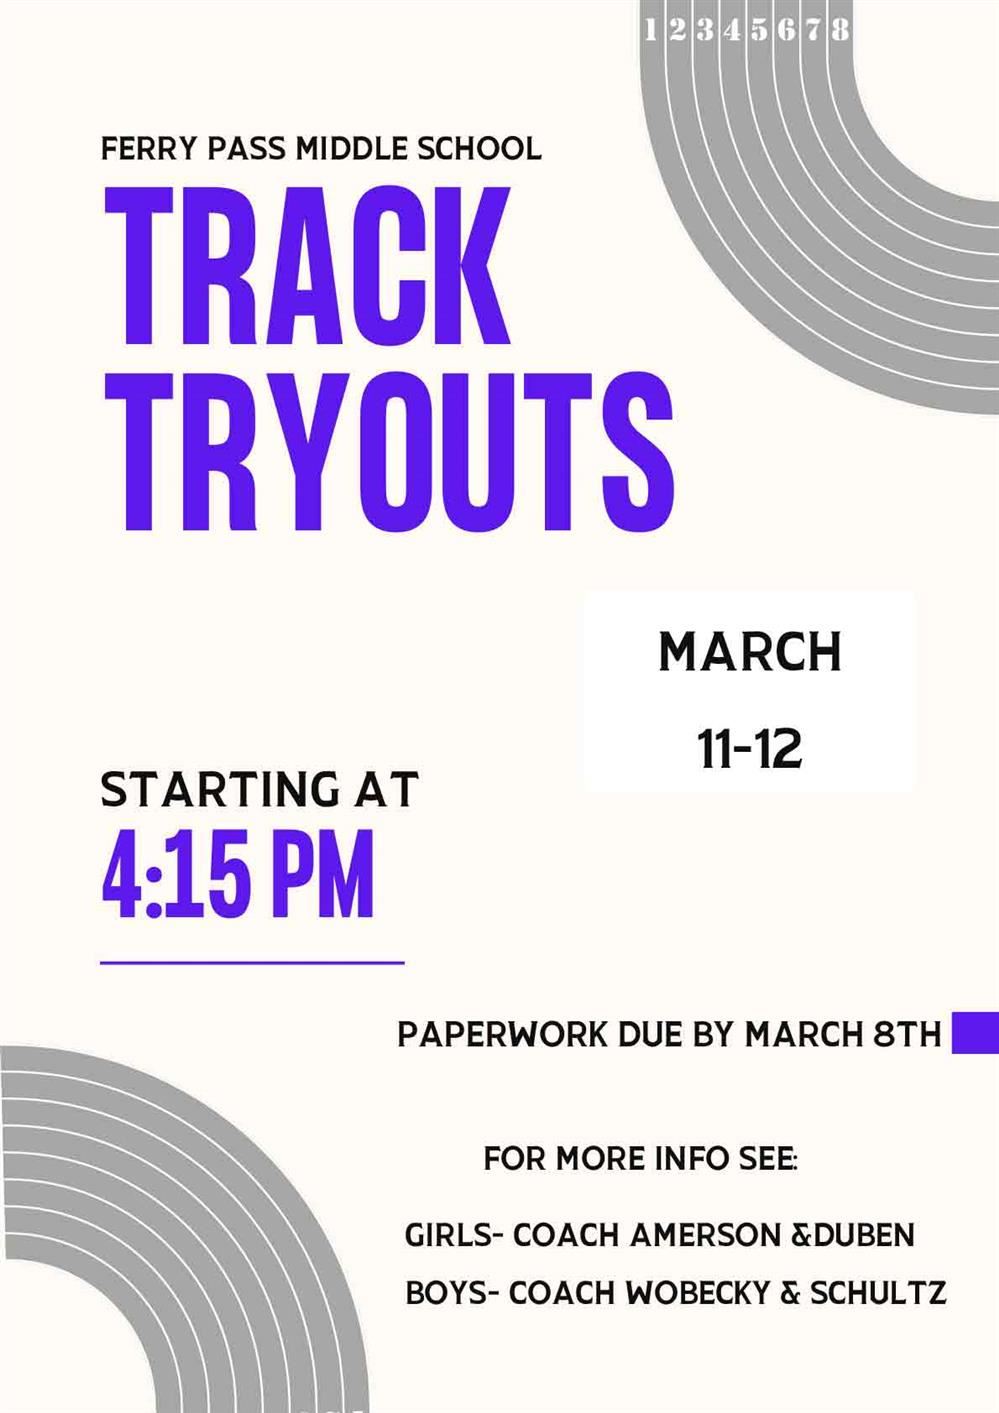  FPMS: Track Tryouts